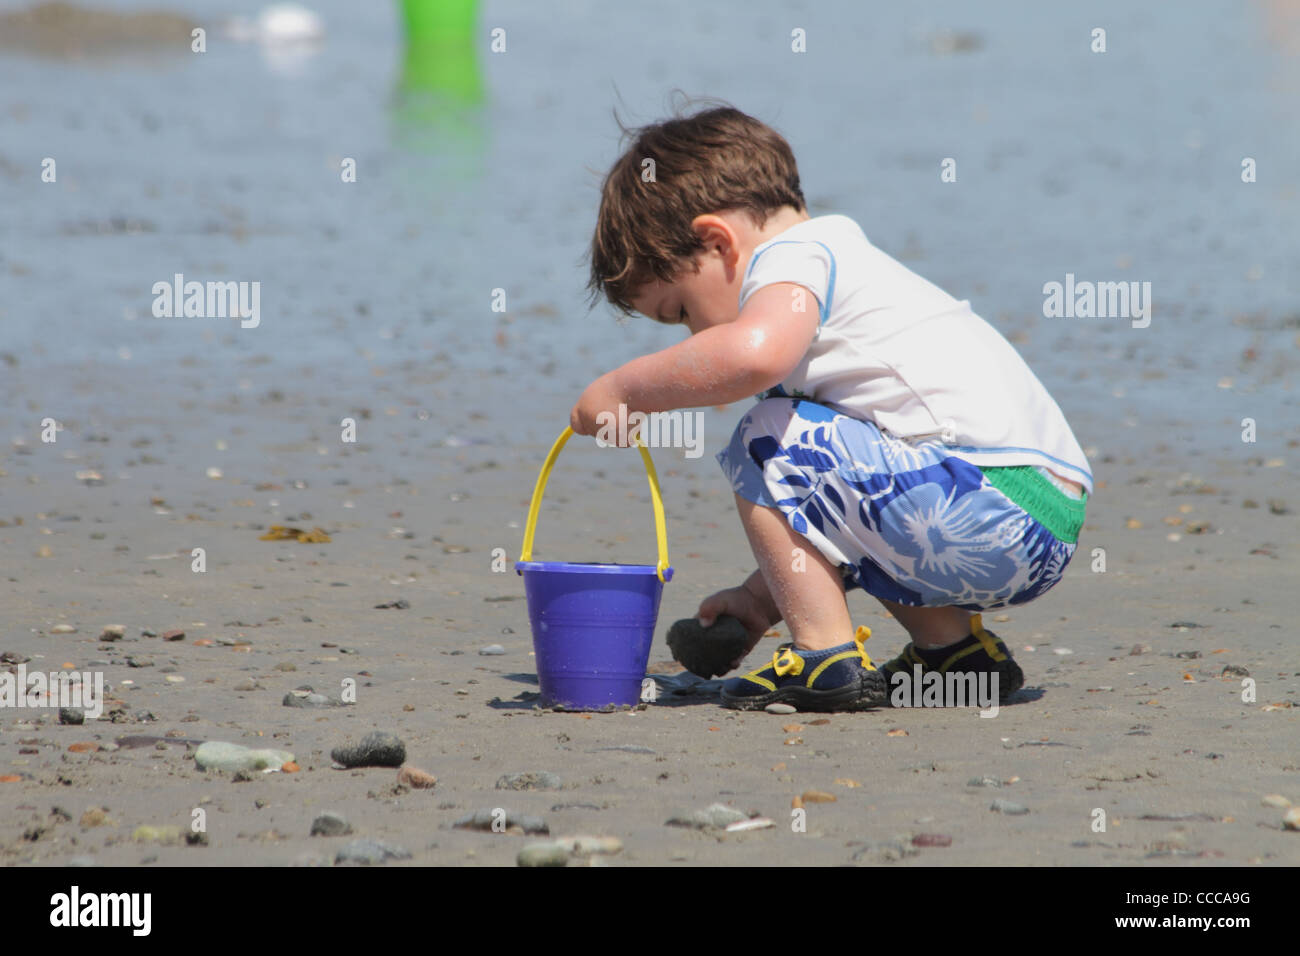 boy 3-4 years old collecting rocks on the beach Stock Photo